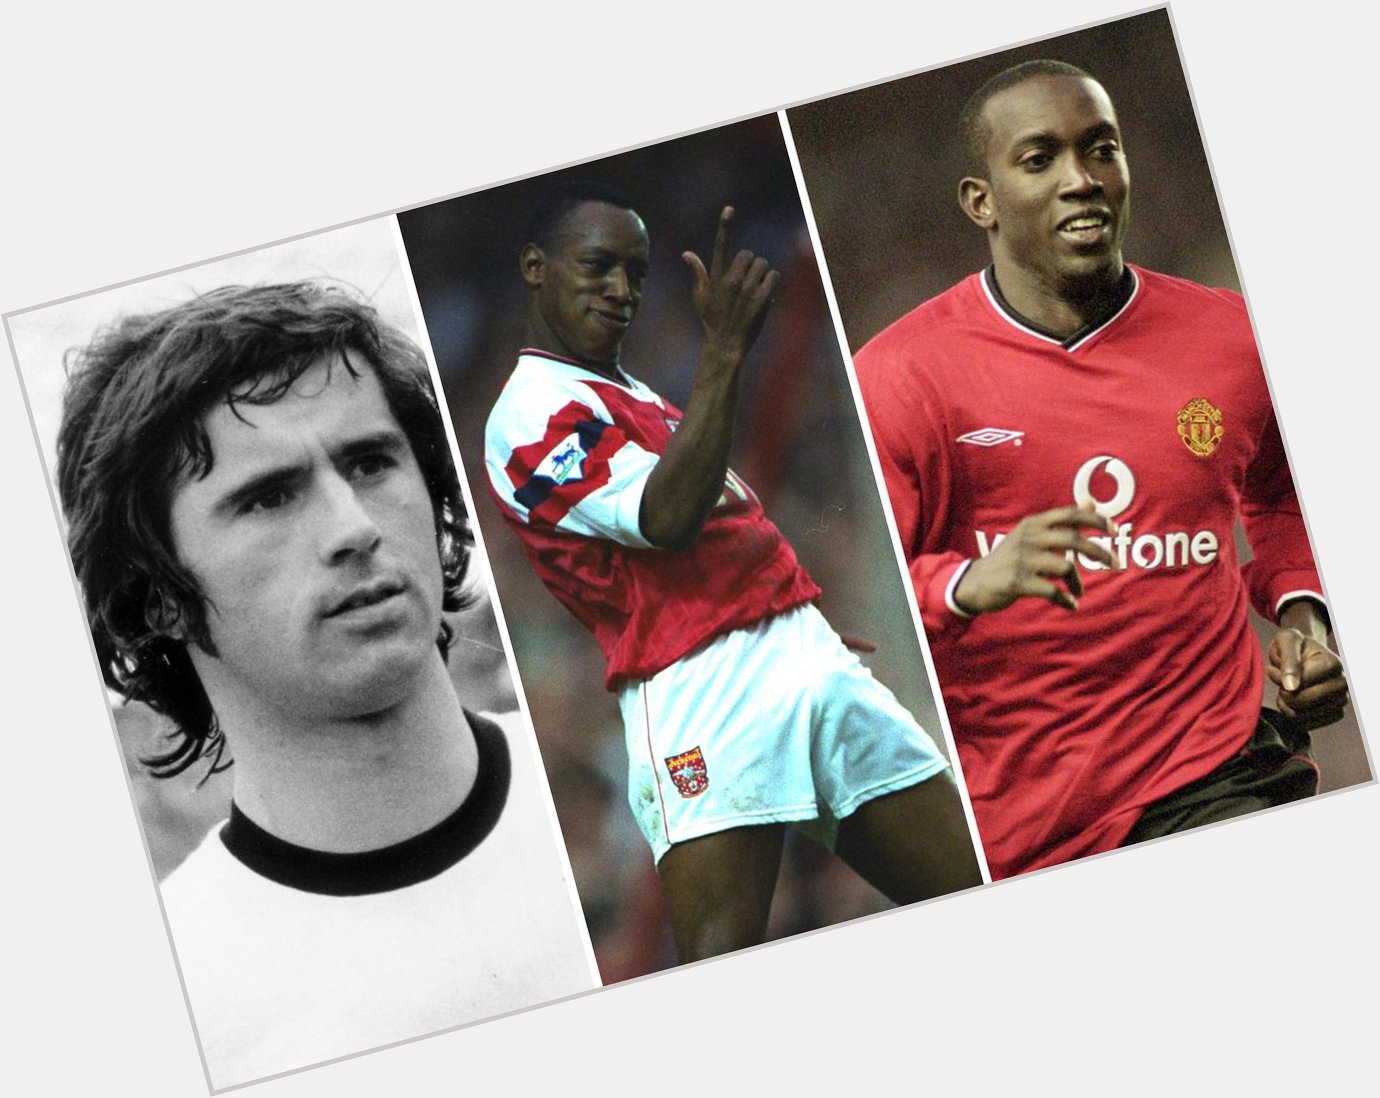 November 3 is a golden day for strikers. Happy birthday to Gerd Muller (69), Ian Wright (51) and Dwight Yorke (43). 